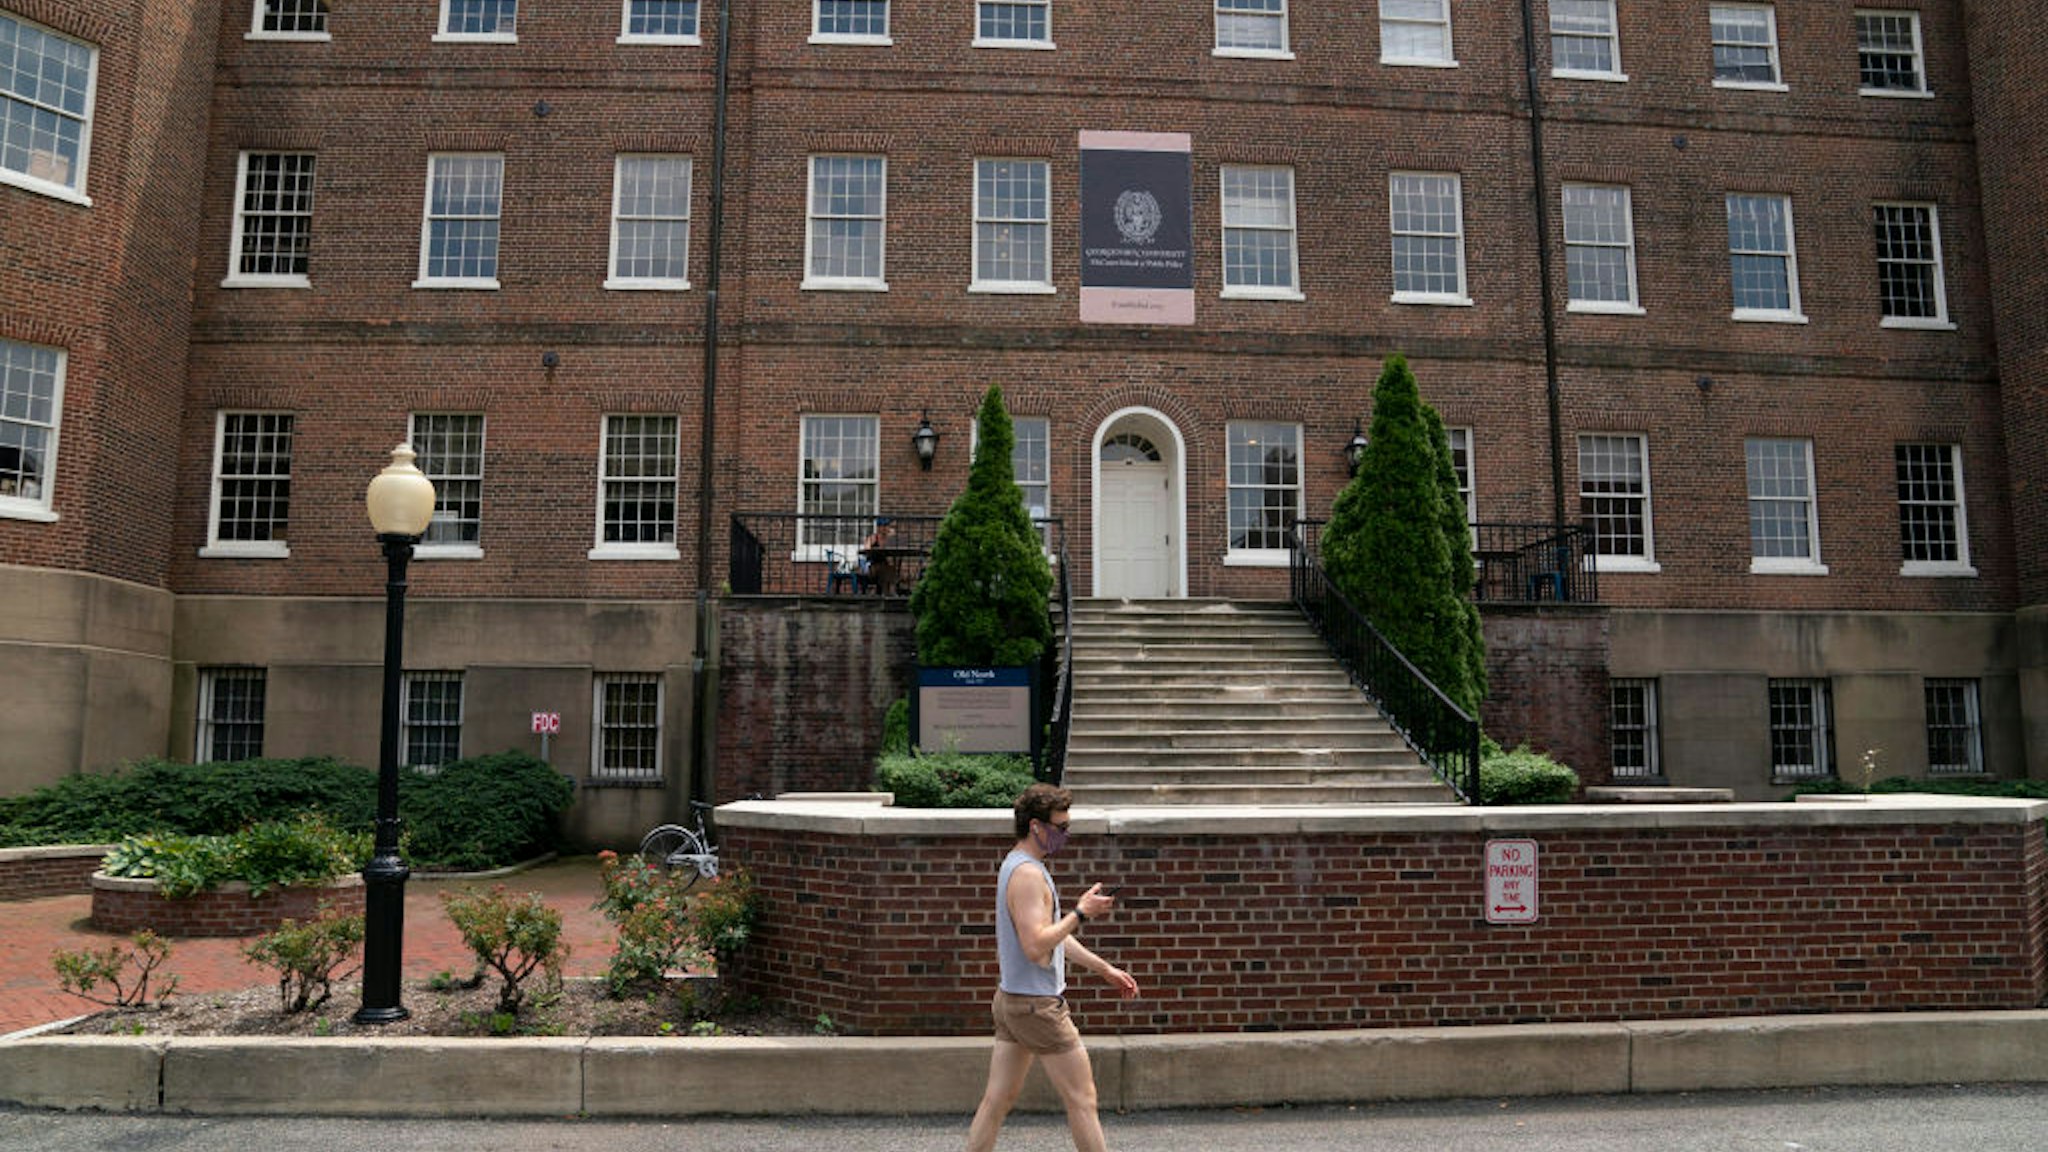 A man walks on Georgetown University's main campus in Washington, D.C., the United States, on July 7, 2020.